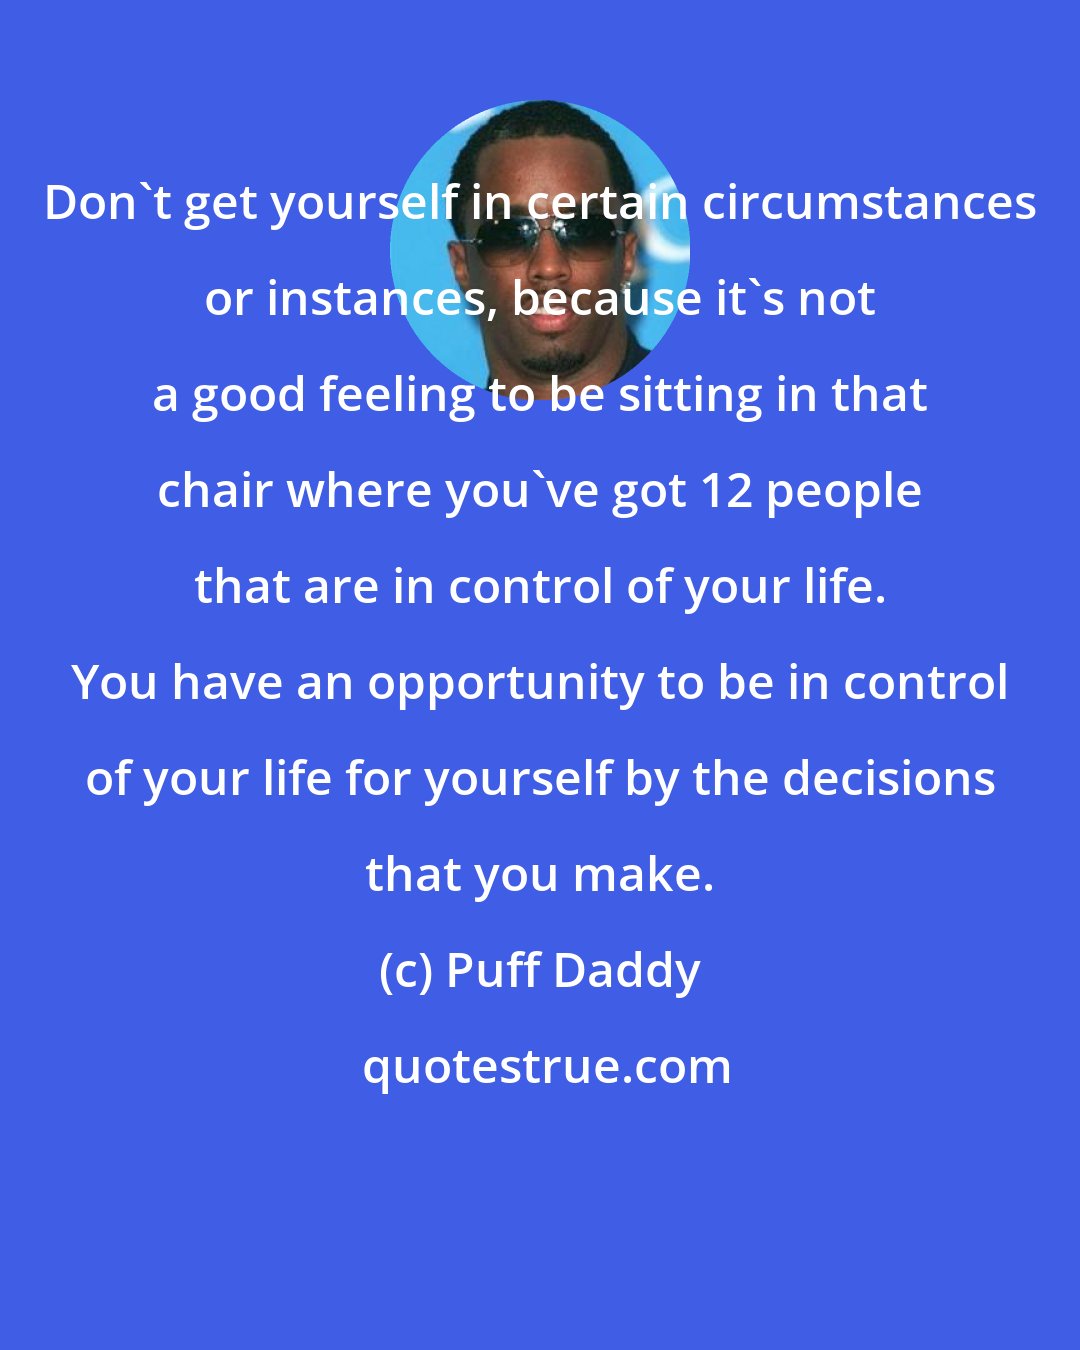 Puff Daddy: Don't get yourself in certain circumstances or instances, because it's not a good feeling to be sitting in that chair where you've got 12 people that are in control of your life. You have an opportunity to be in control of your life for yourself by the decisions that you make.